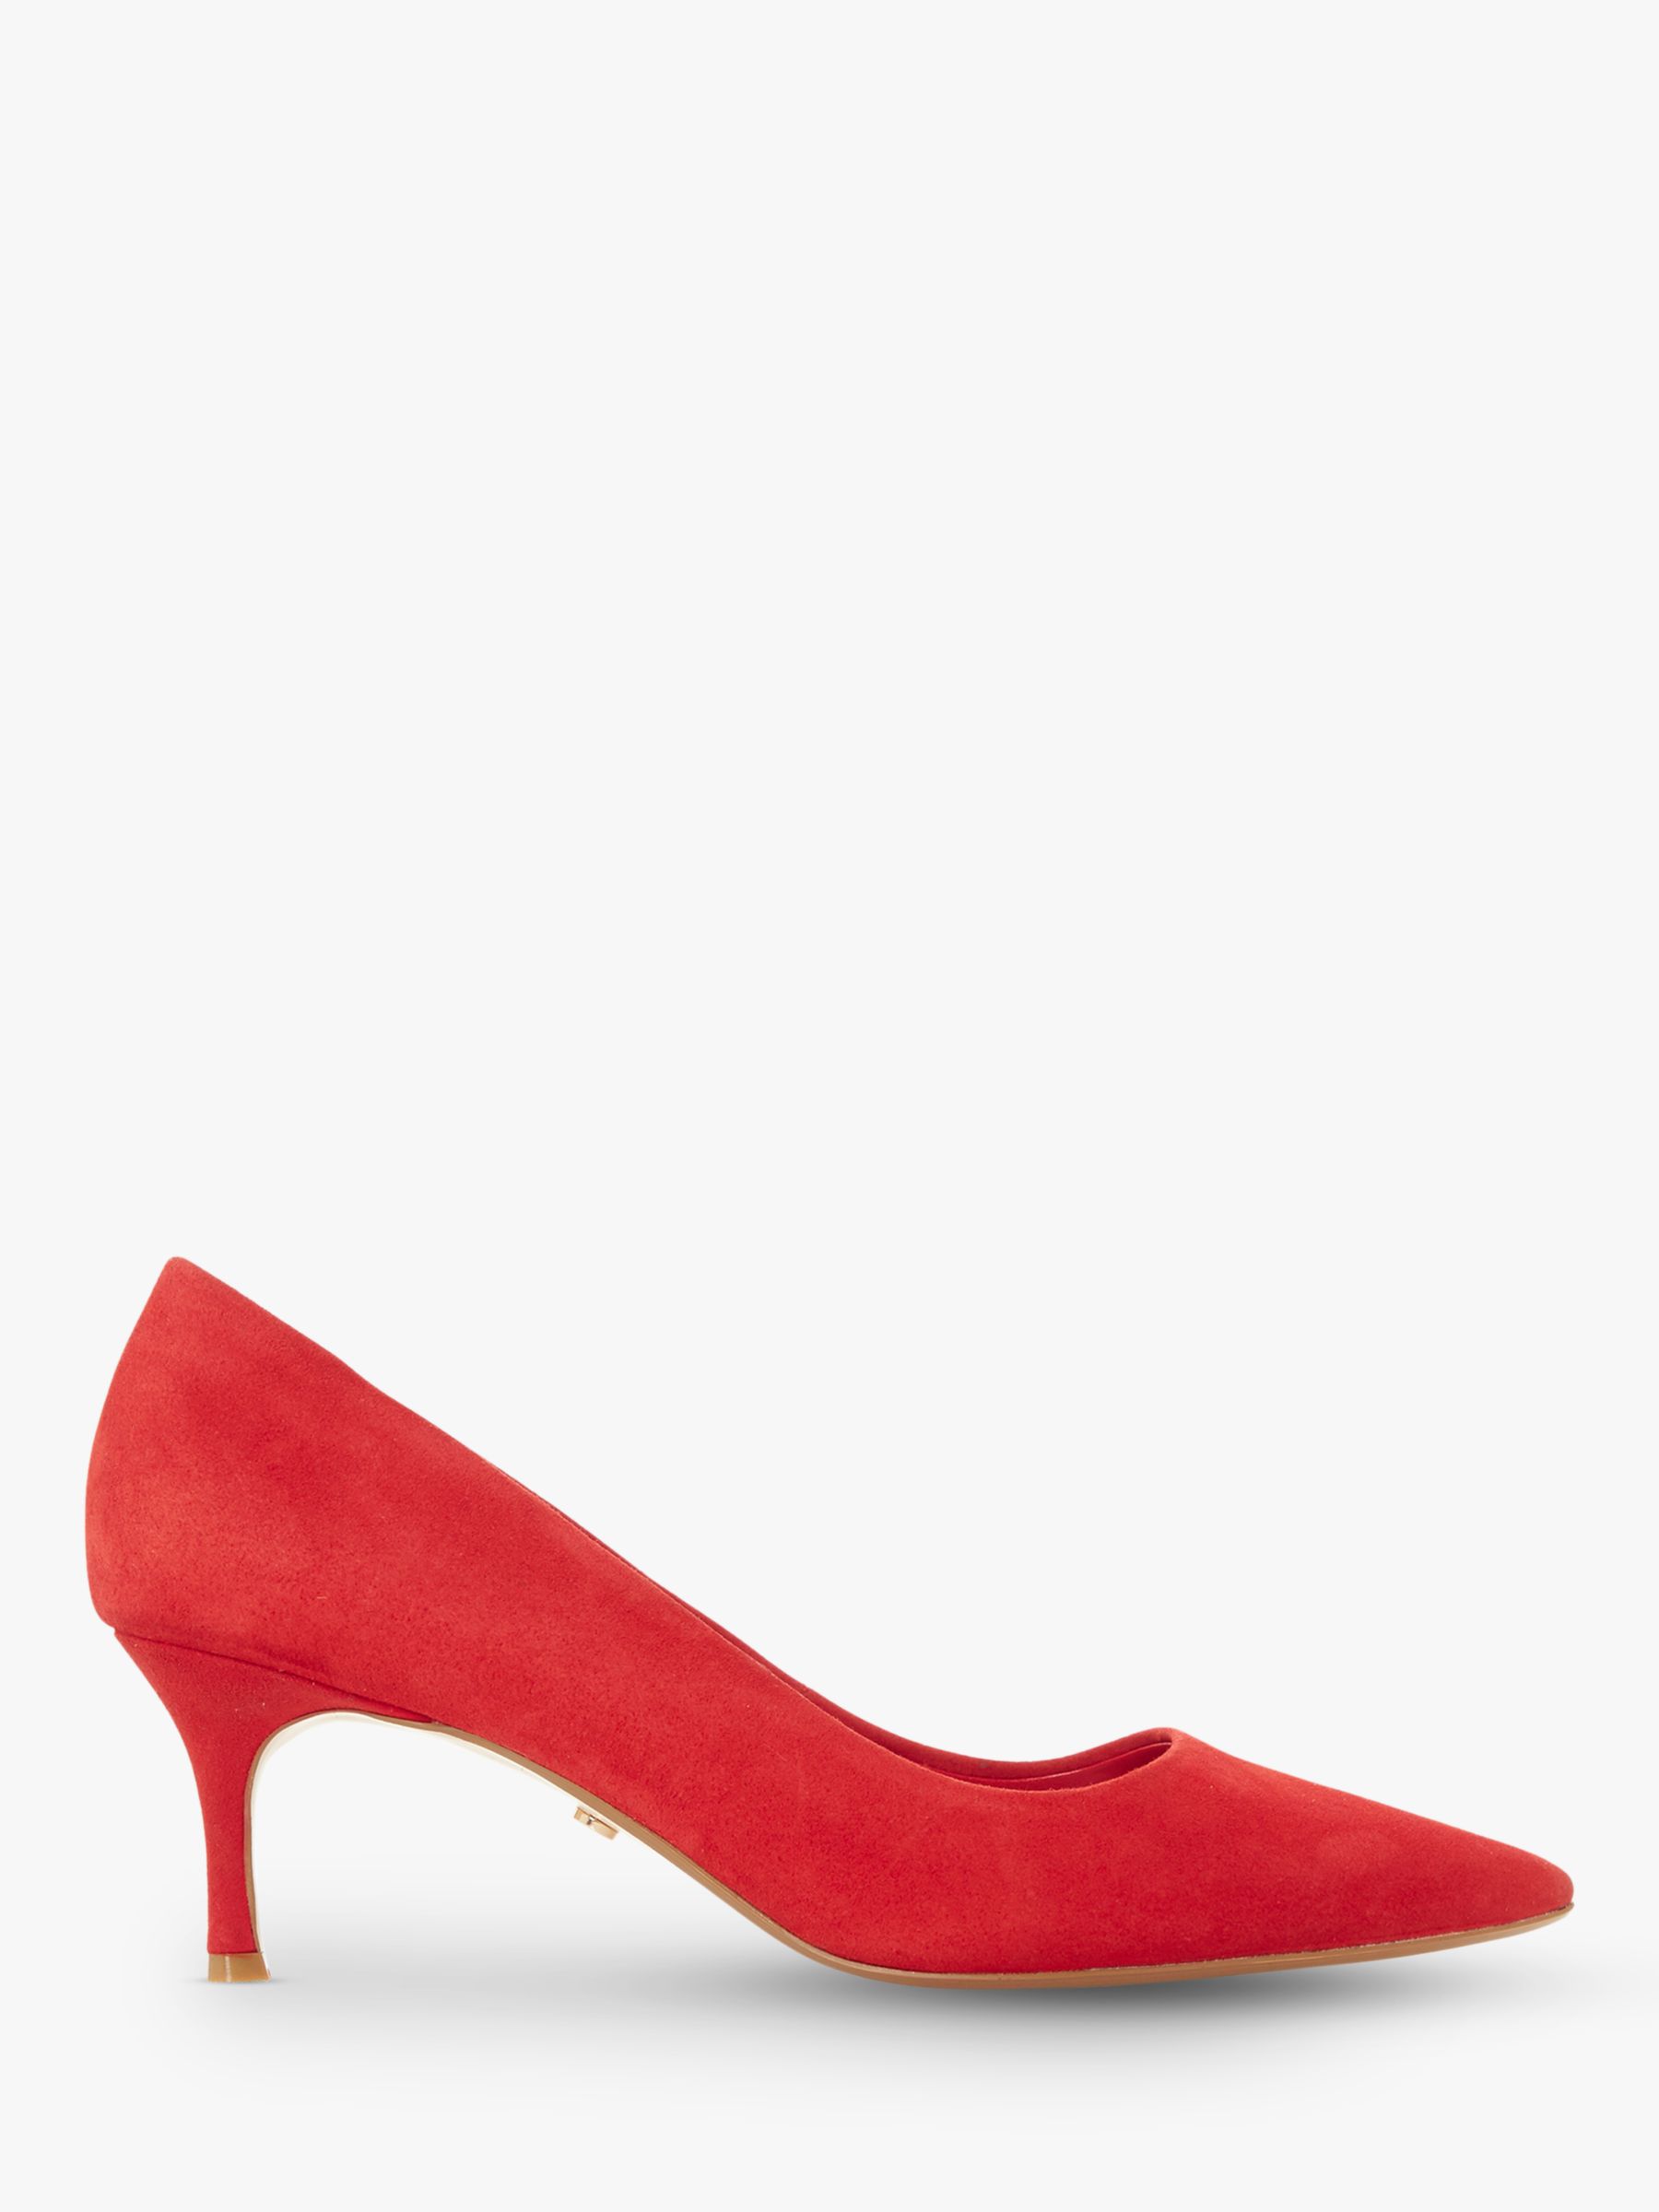 Dune Astal Pointed Toe Court Shoes, Red Suede